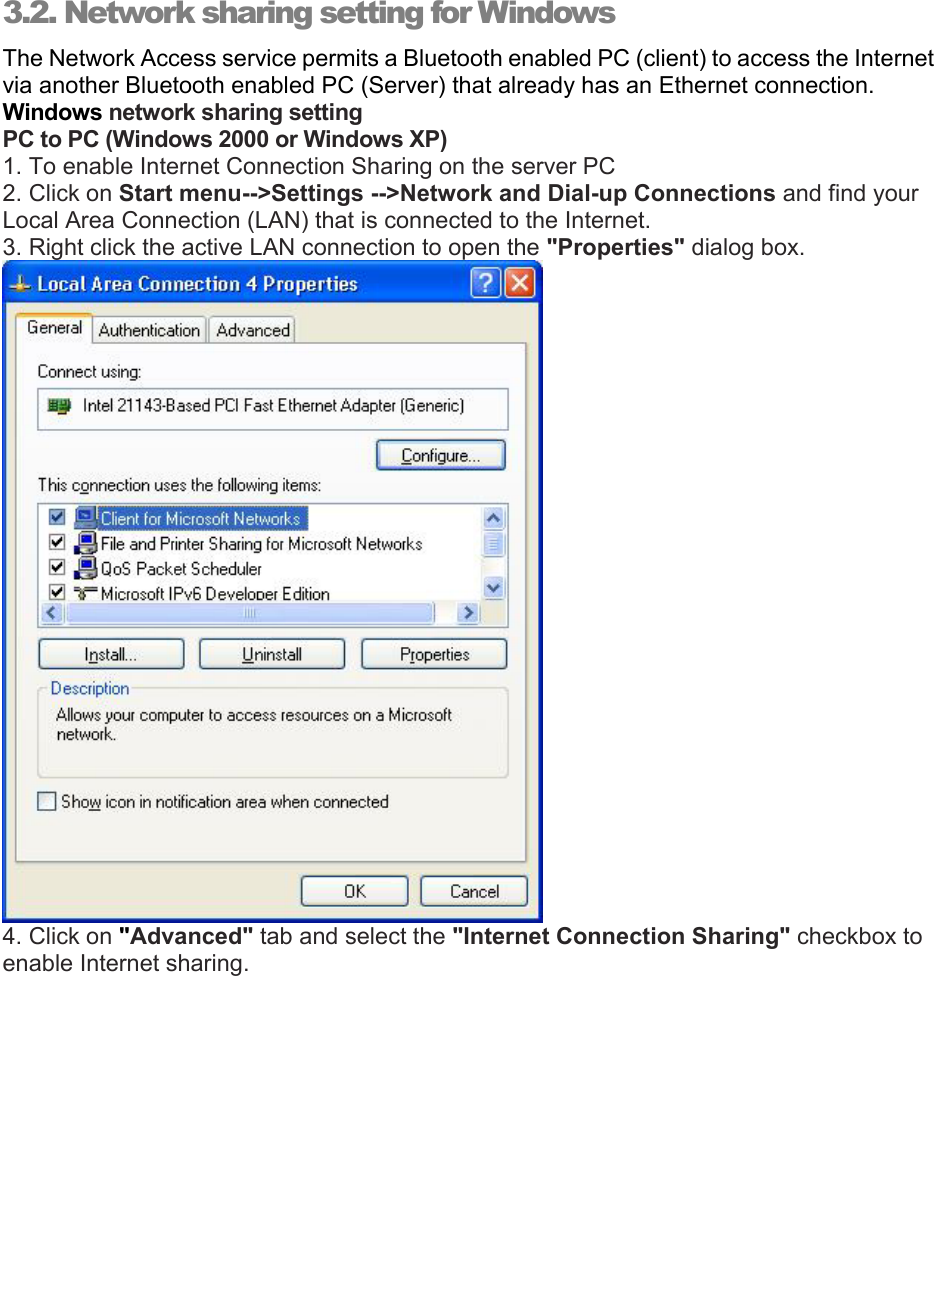   3.2. Network sharing setting for Windows The Network Access service permits a Bluetooth enabled PC (client) to access the Internet via another Bluetooth enabled PC (Server) that already has an Ethernet connection.  Windows network sharing setting PC to PC (Windows 2000 or Windows XP) 1. To enable Internet Connection Sharing on the server PC 2. Click on Start menu--&gt;Settings --&gt;Network and Dial-up Connections and find your Local Area Connection (LAN) that is connected to the Internet. 3. Right click the active LAN connection to open the &quot;Properties&quot; dialog box.  4. Click on &quot;Advanced&quot; tab and select the &quot;Internet Connection Sharing&quot; checkbox to enable Internet sharing. 